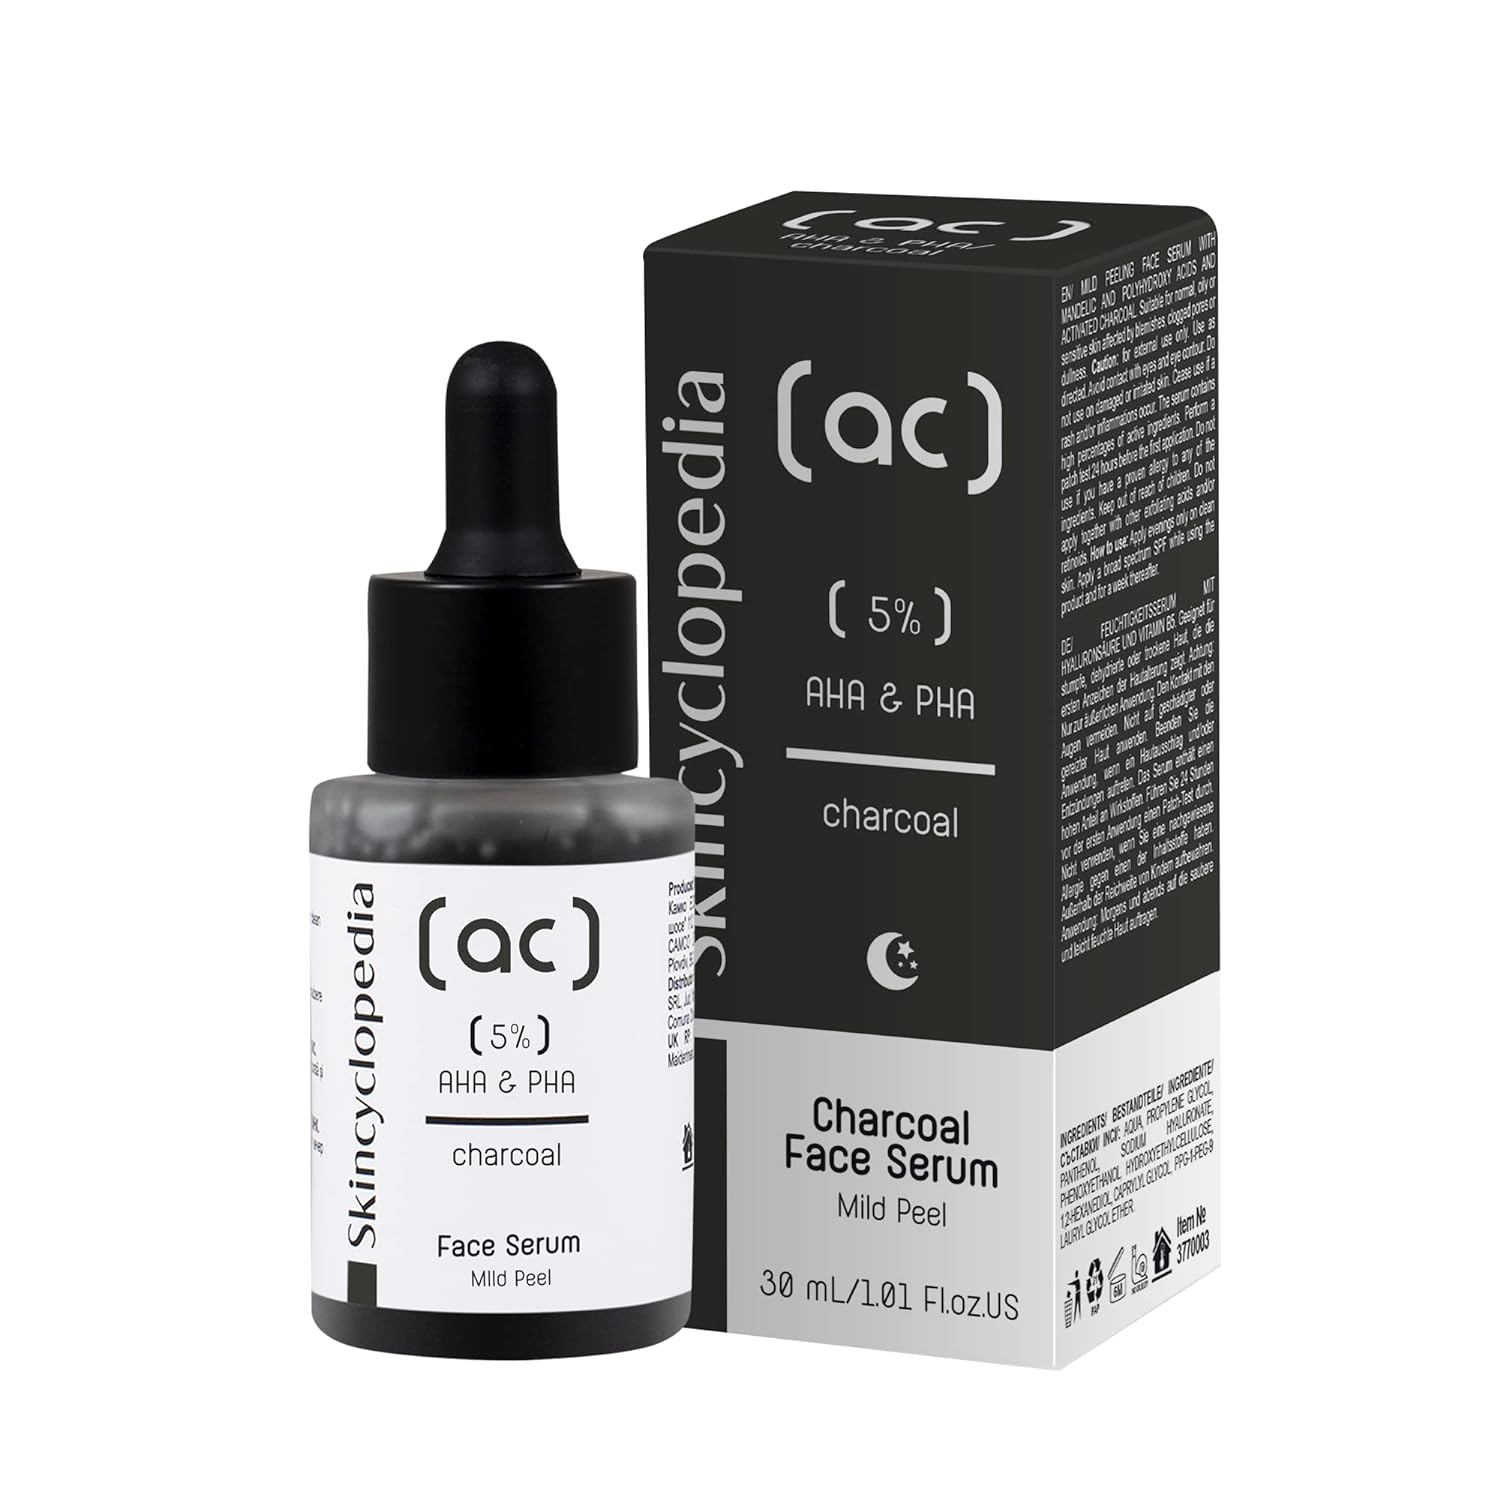 SKINCYCLOPEDIA Face Serum with Charcoal 5% AHA + PHA Complex